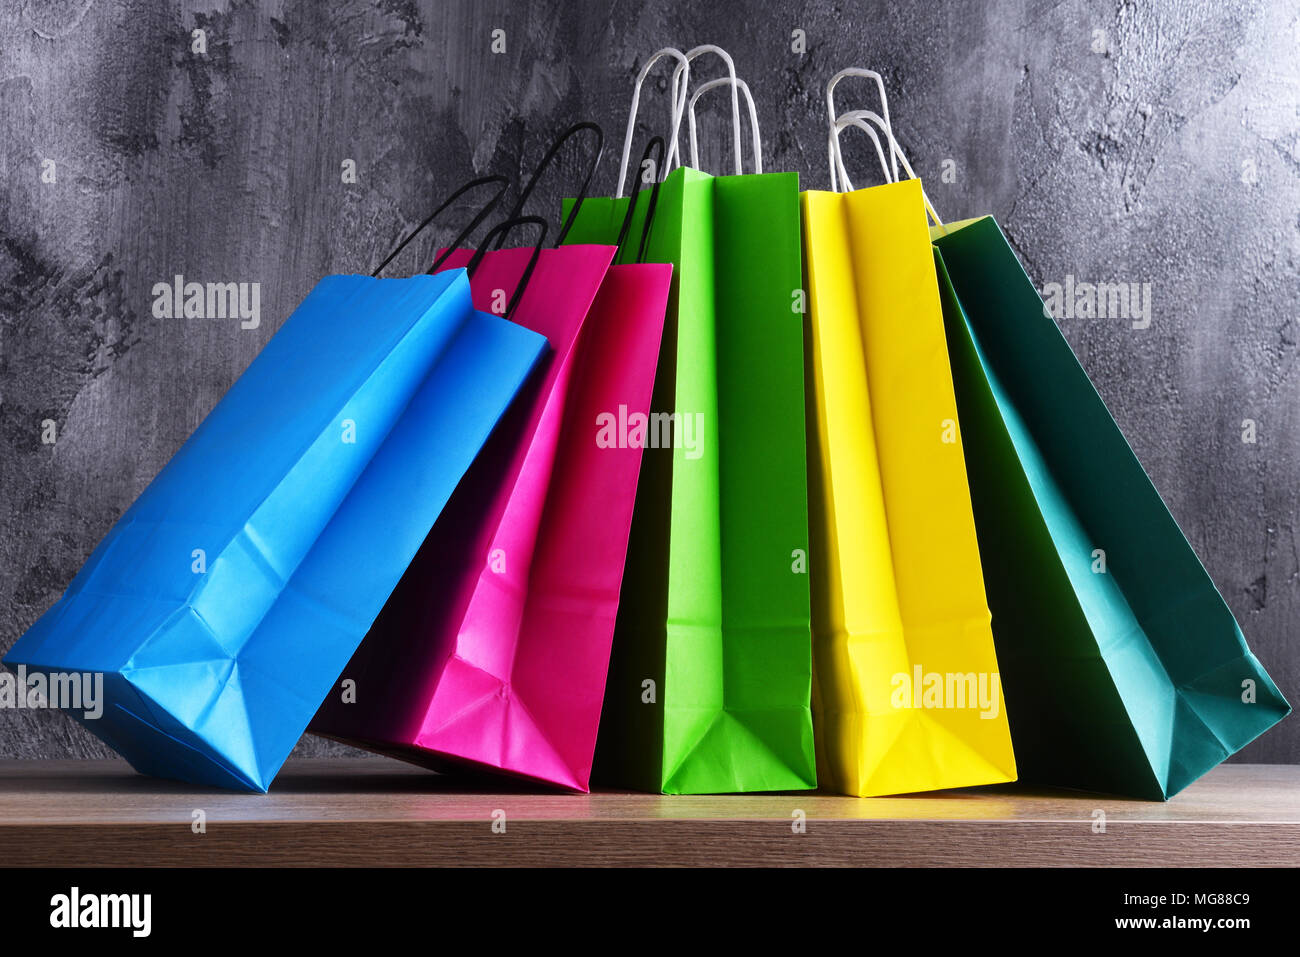 Composition with colorful paper shopping bags Stock Photo - Alamy